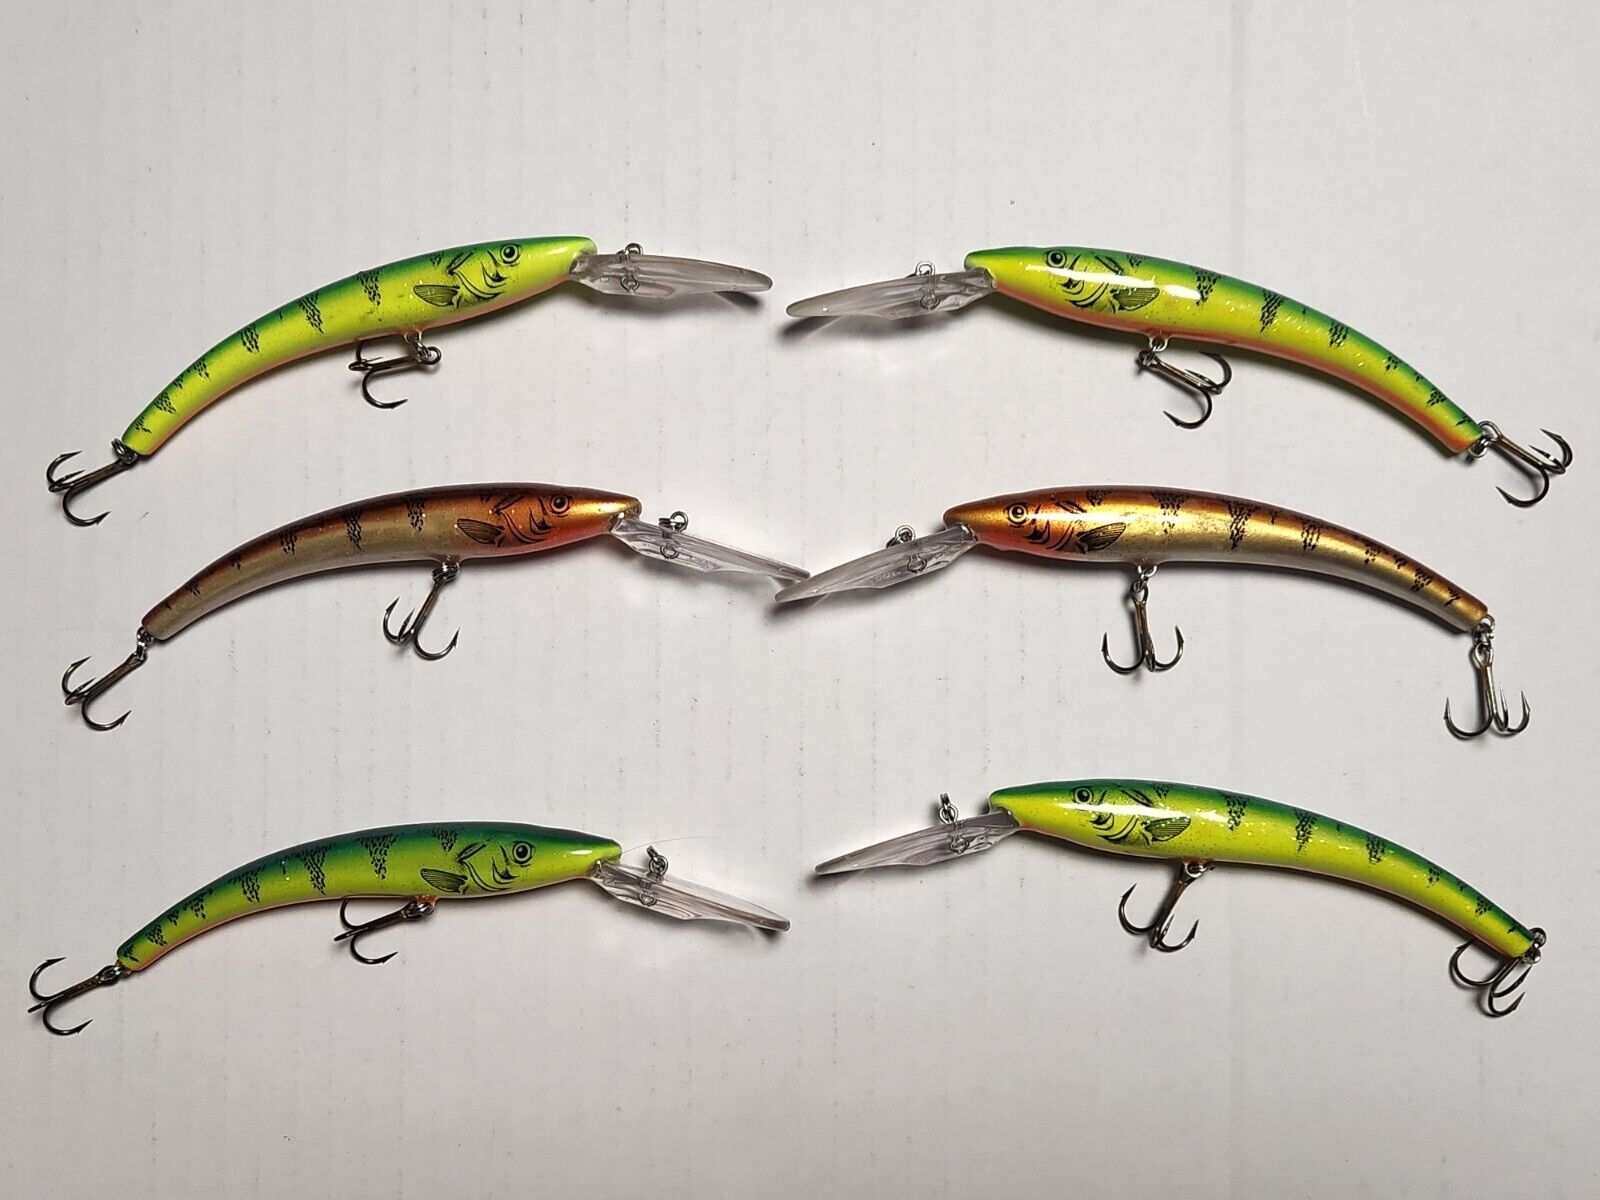 Lot Of 6 Reef Runner 800 Series Fishing Lures, assorted colors (g18)